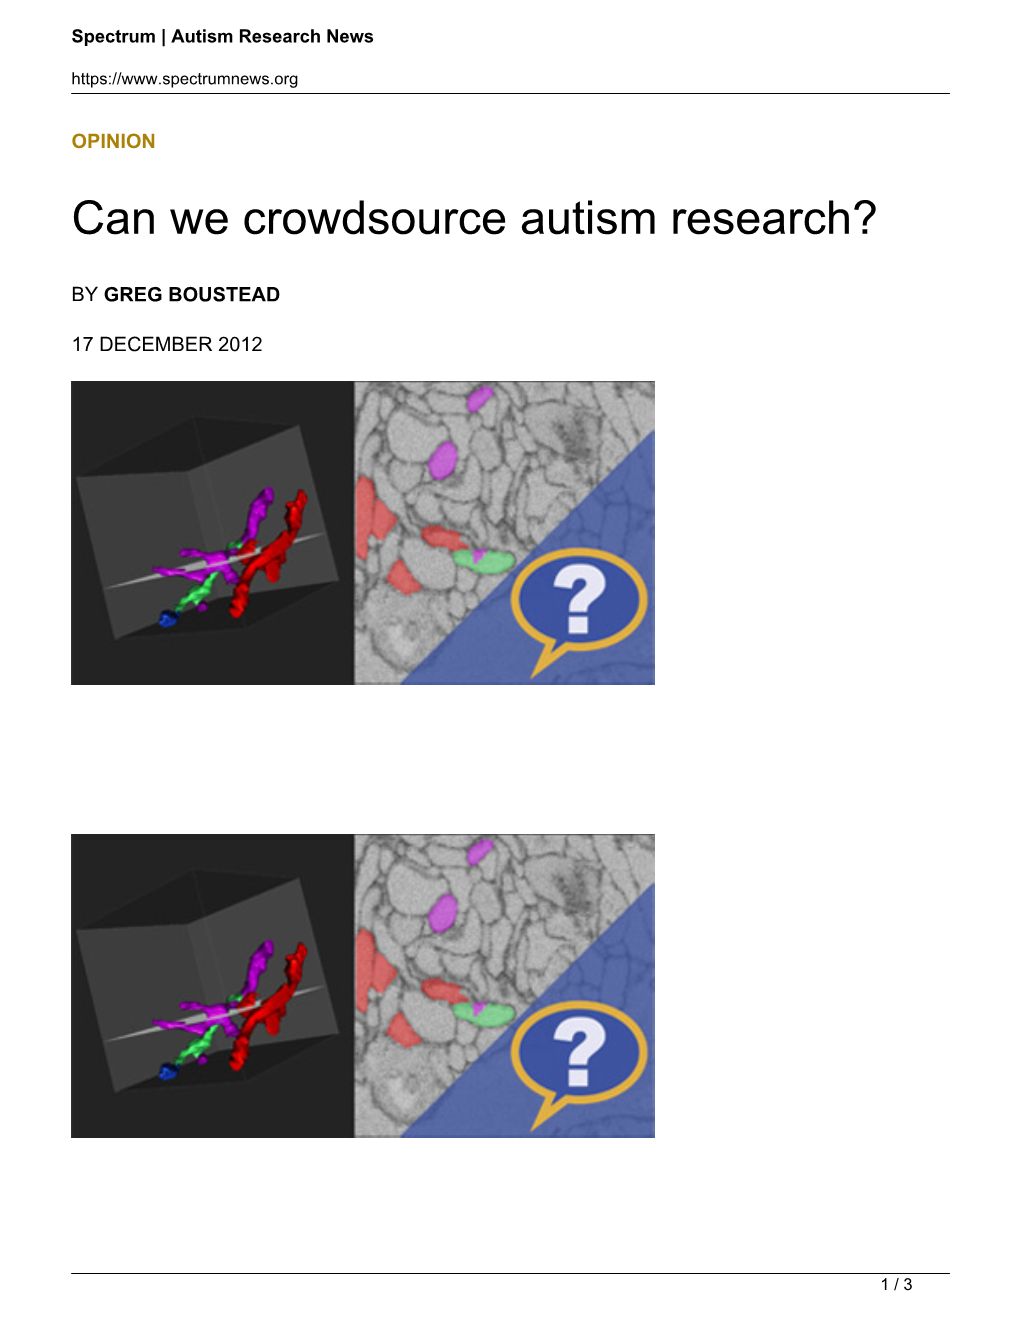 Can We Crowdsource Autism Research?